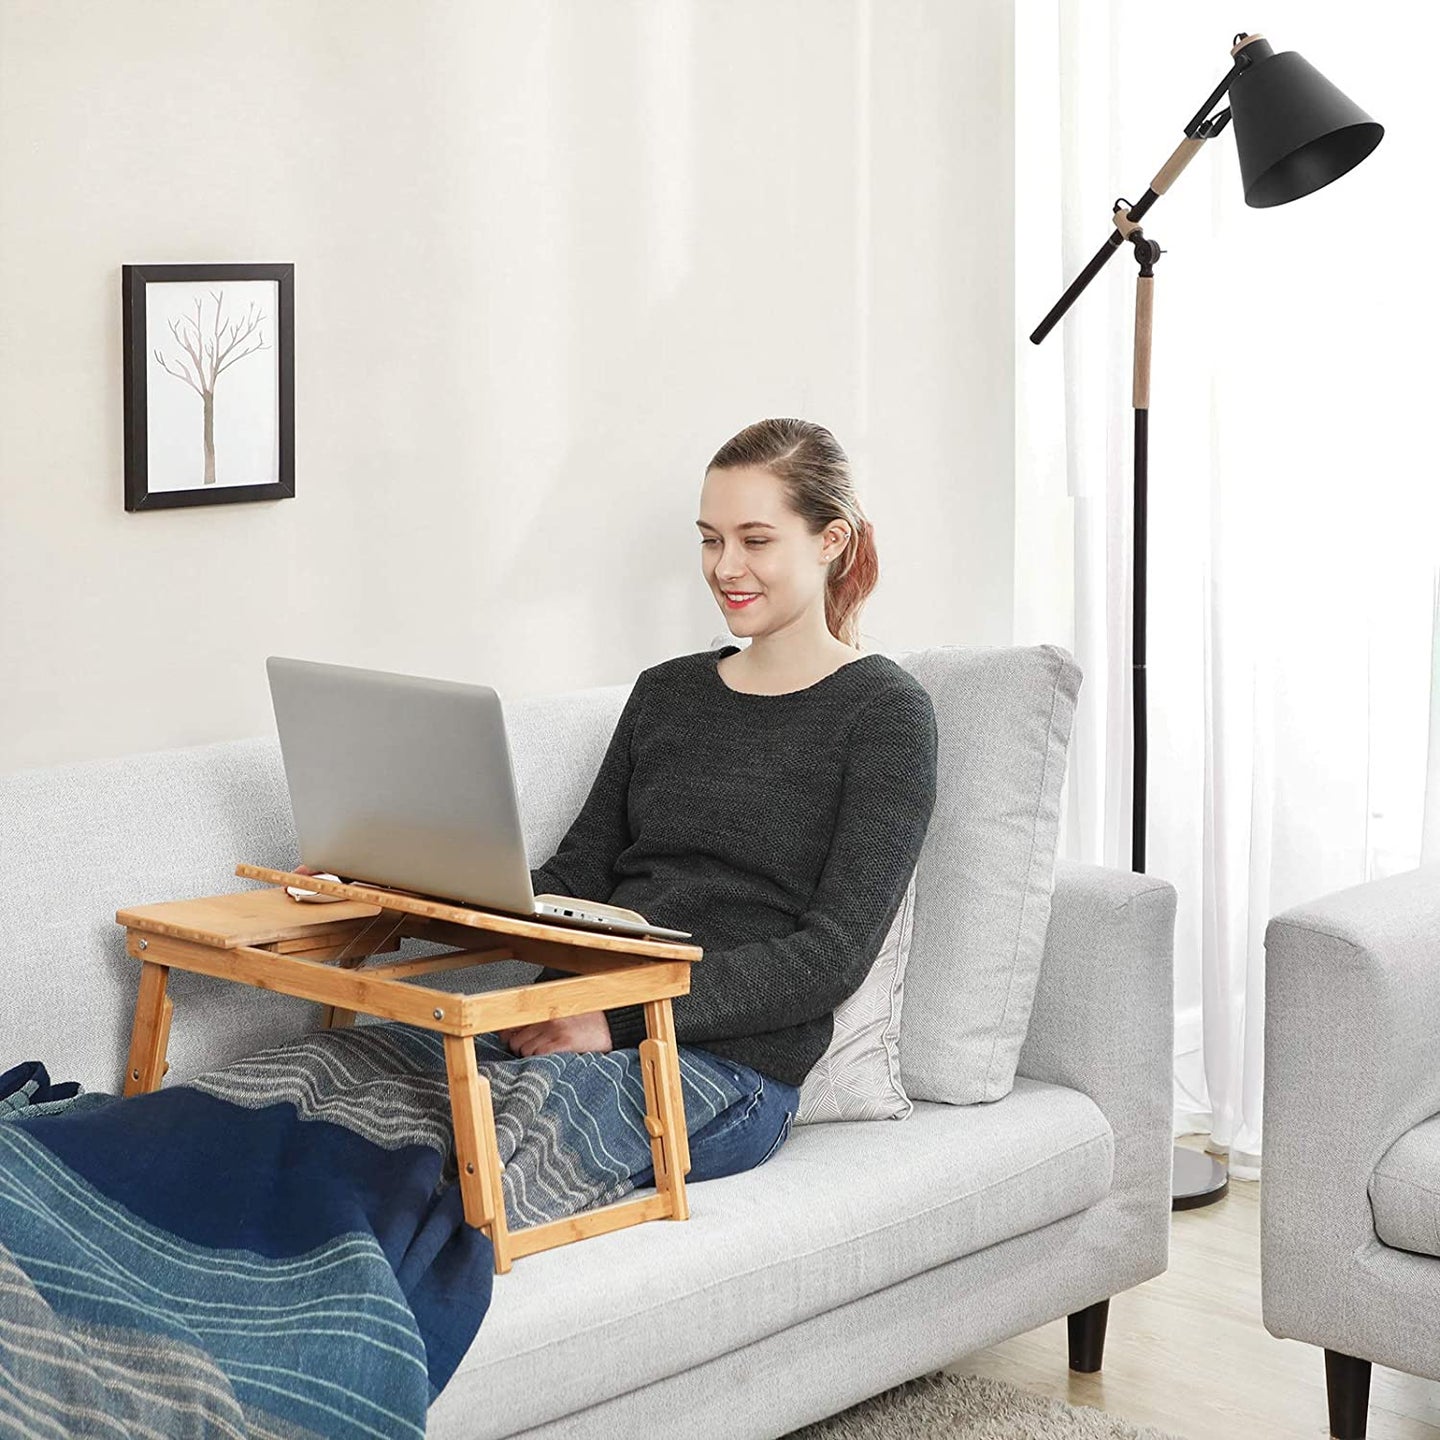 person using a lap desk on a couch